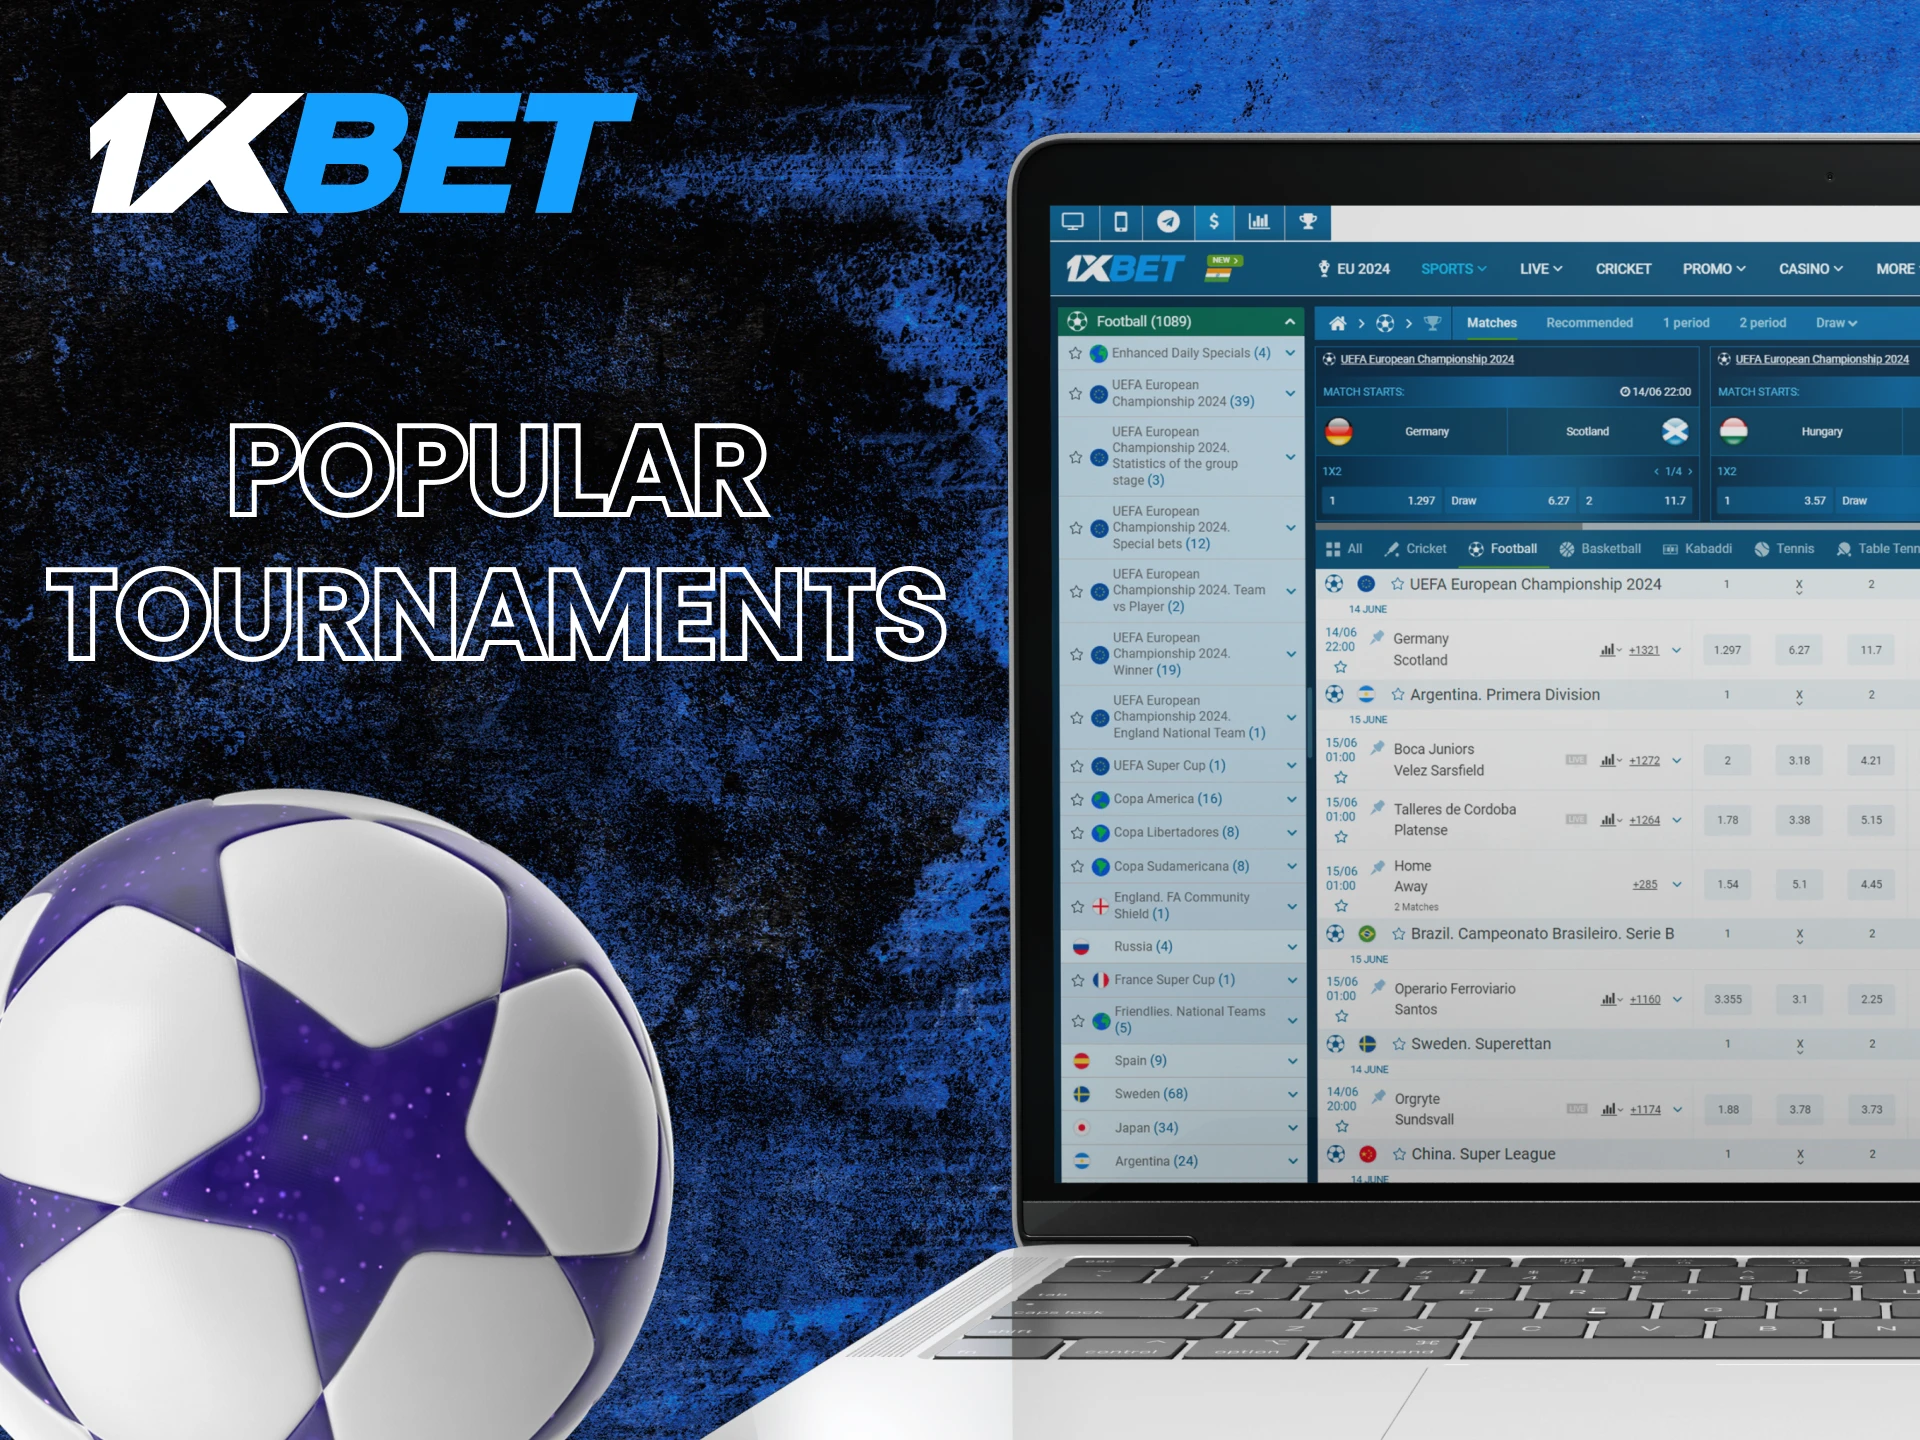 Stay up to date with popular football tournaments with 1xBet.